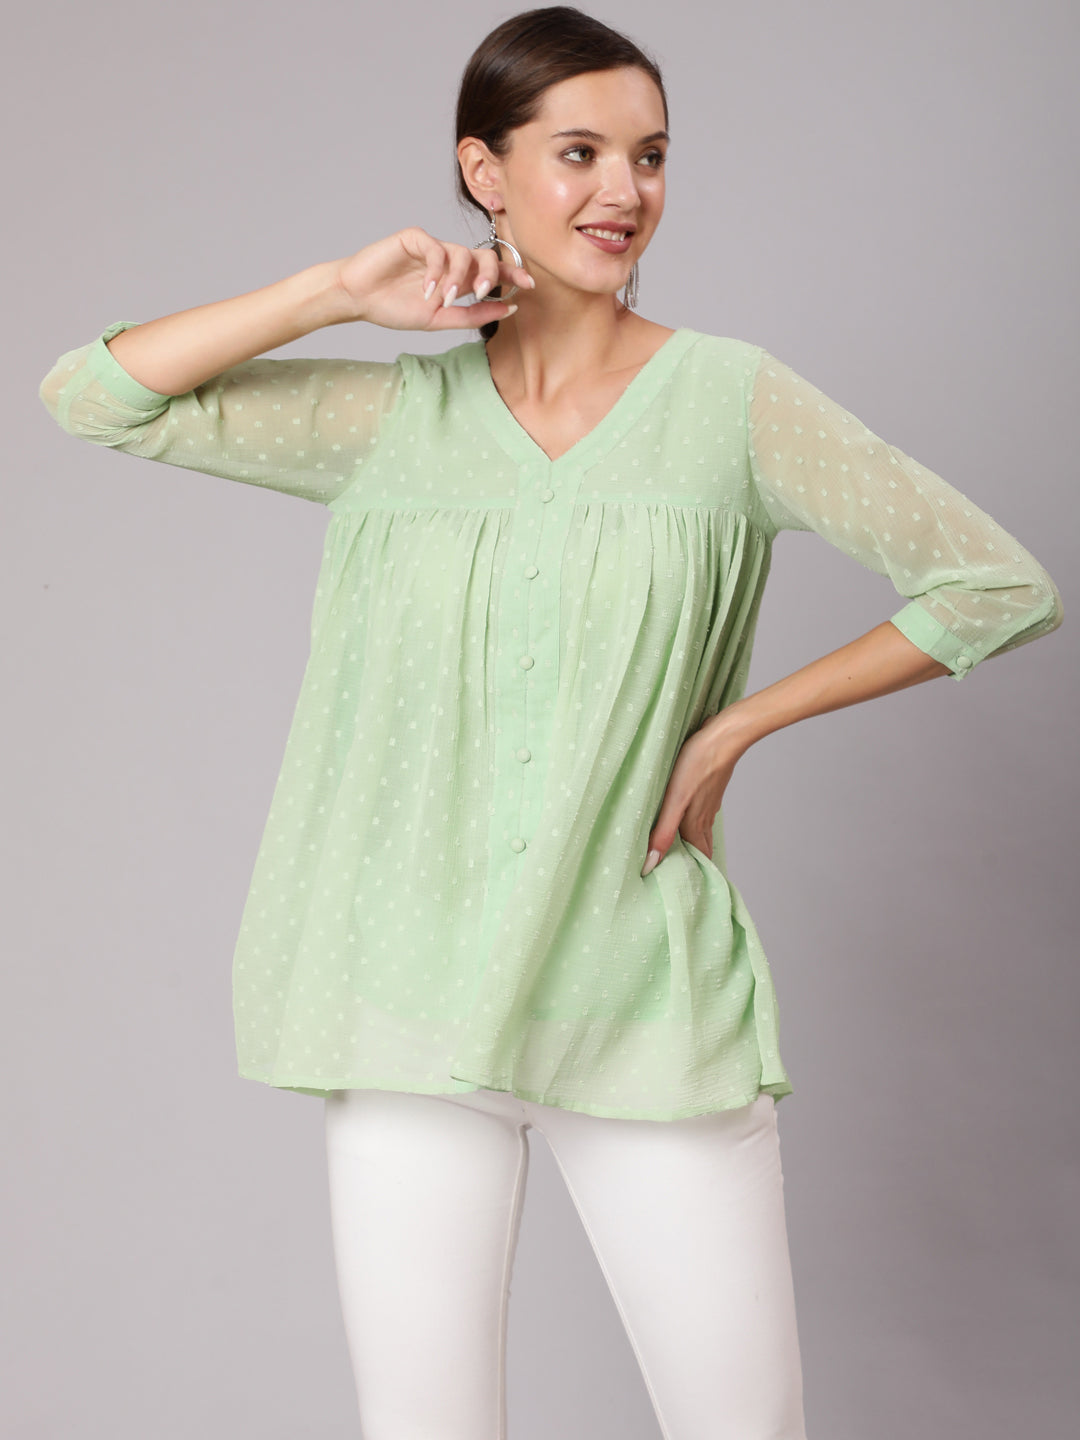 "Green Chiffon Dobby Gathered Top With Flared Hemline	Shop Casual Wear Simple Green Chiffon Dobby Gathered Top for Women & Girls Online. Buy Kurti, Suits, Tops & Dresses at Jaipur Kurti Website at Best Price "